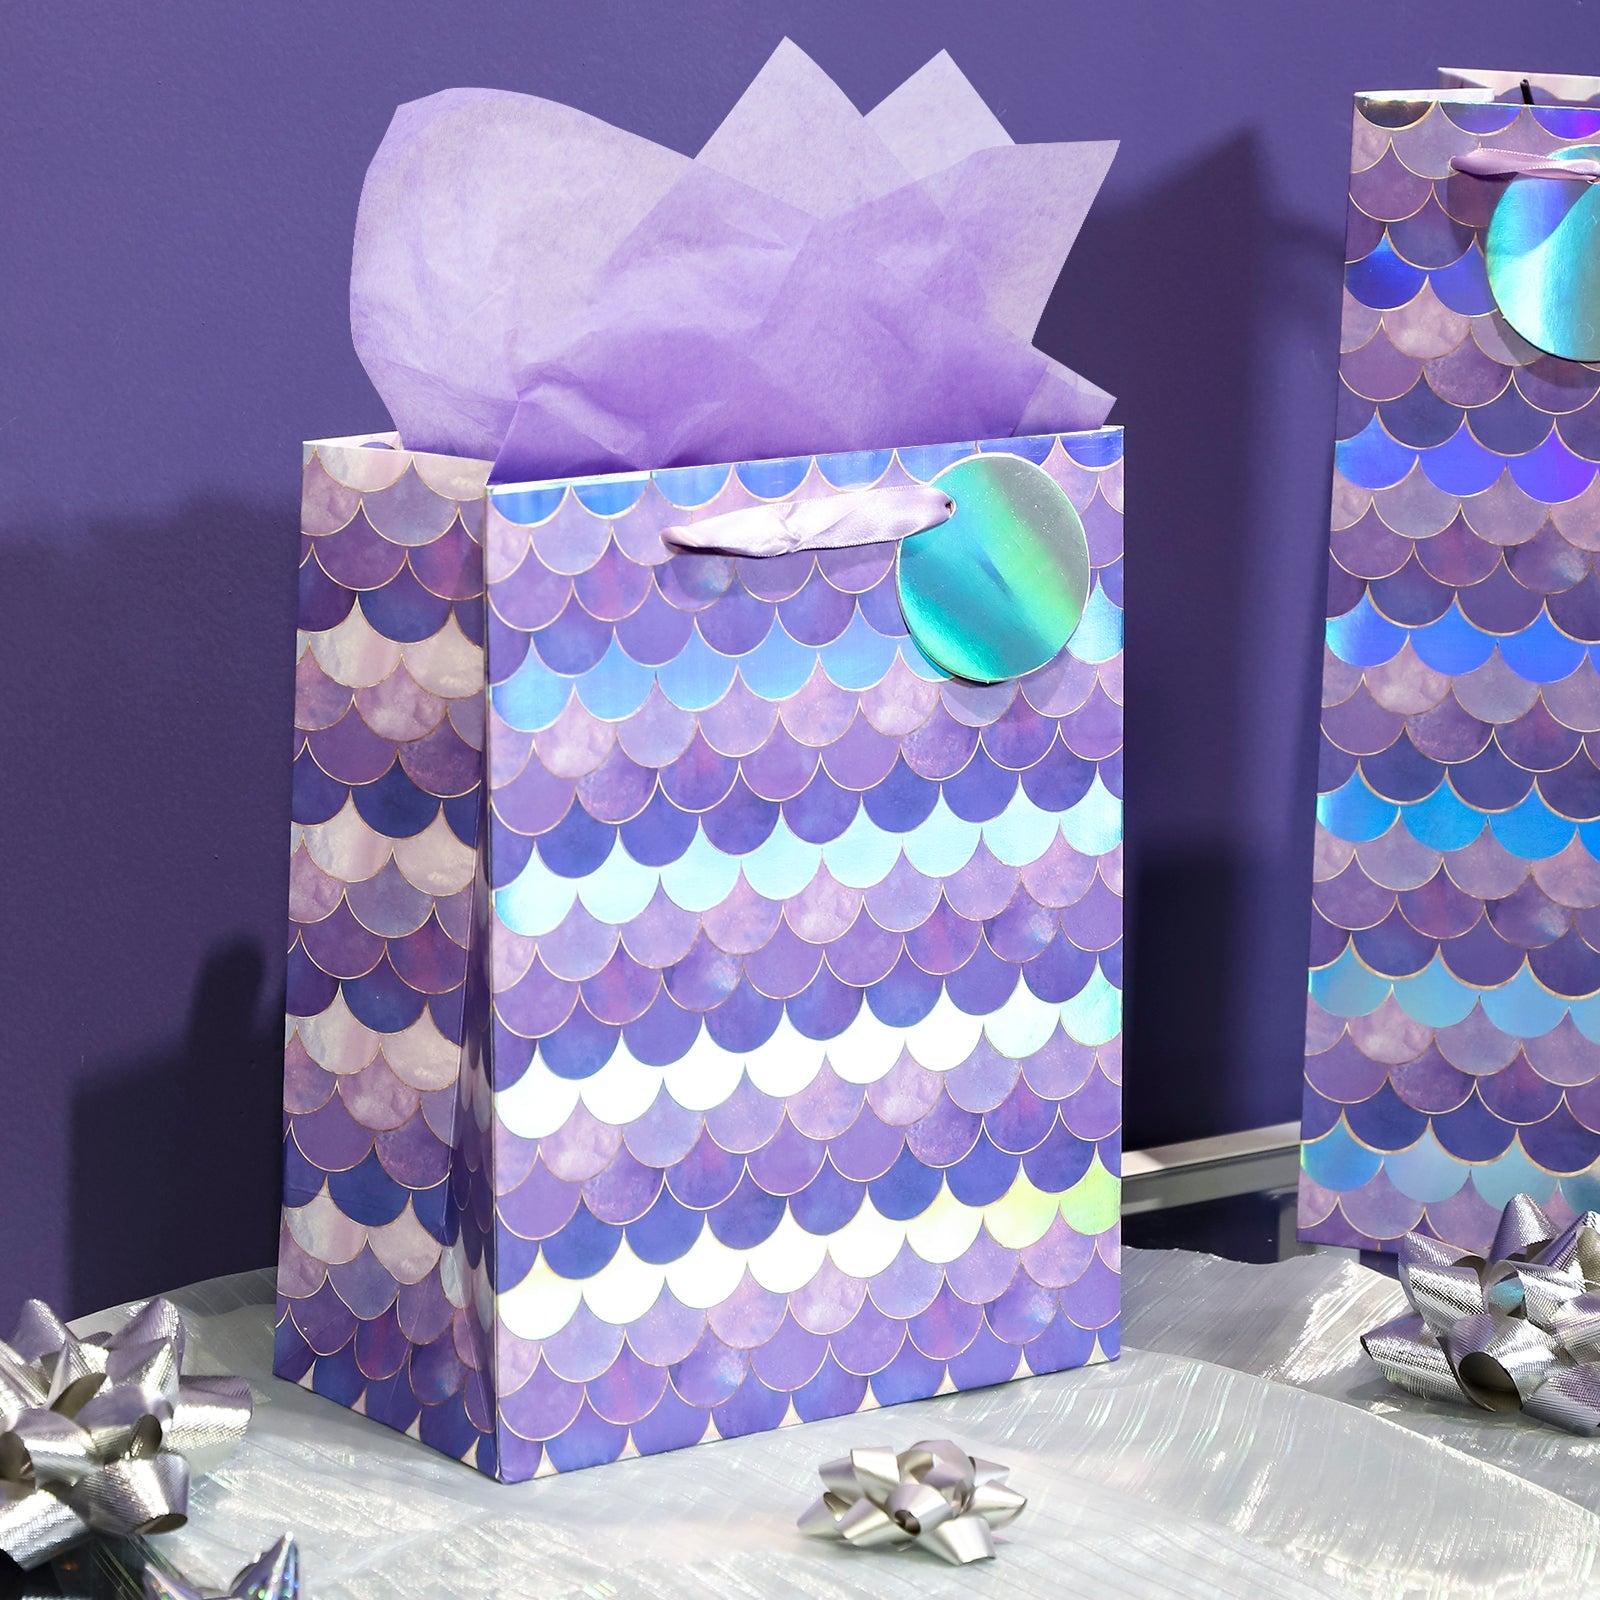 Gift Bags Set - 4 Pack - Purple & Silver Fish Scales With White Tissue Paper